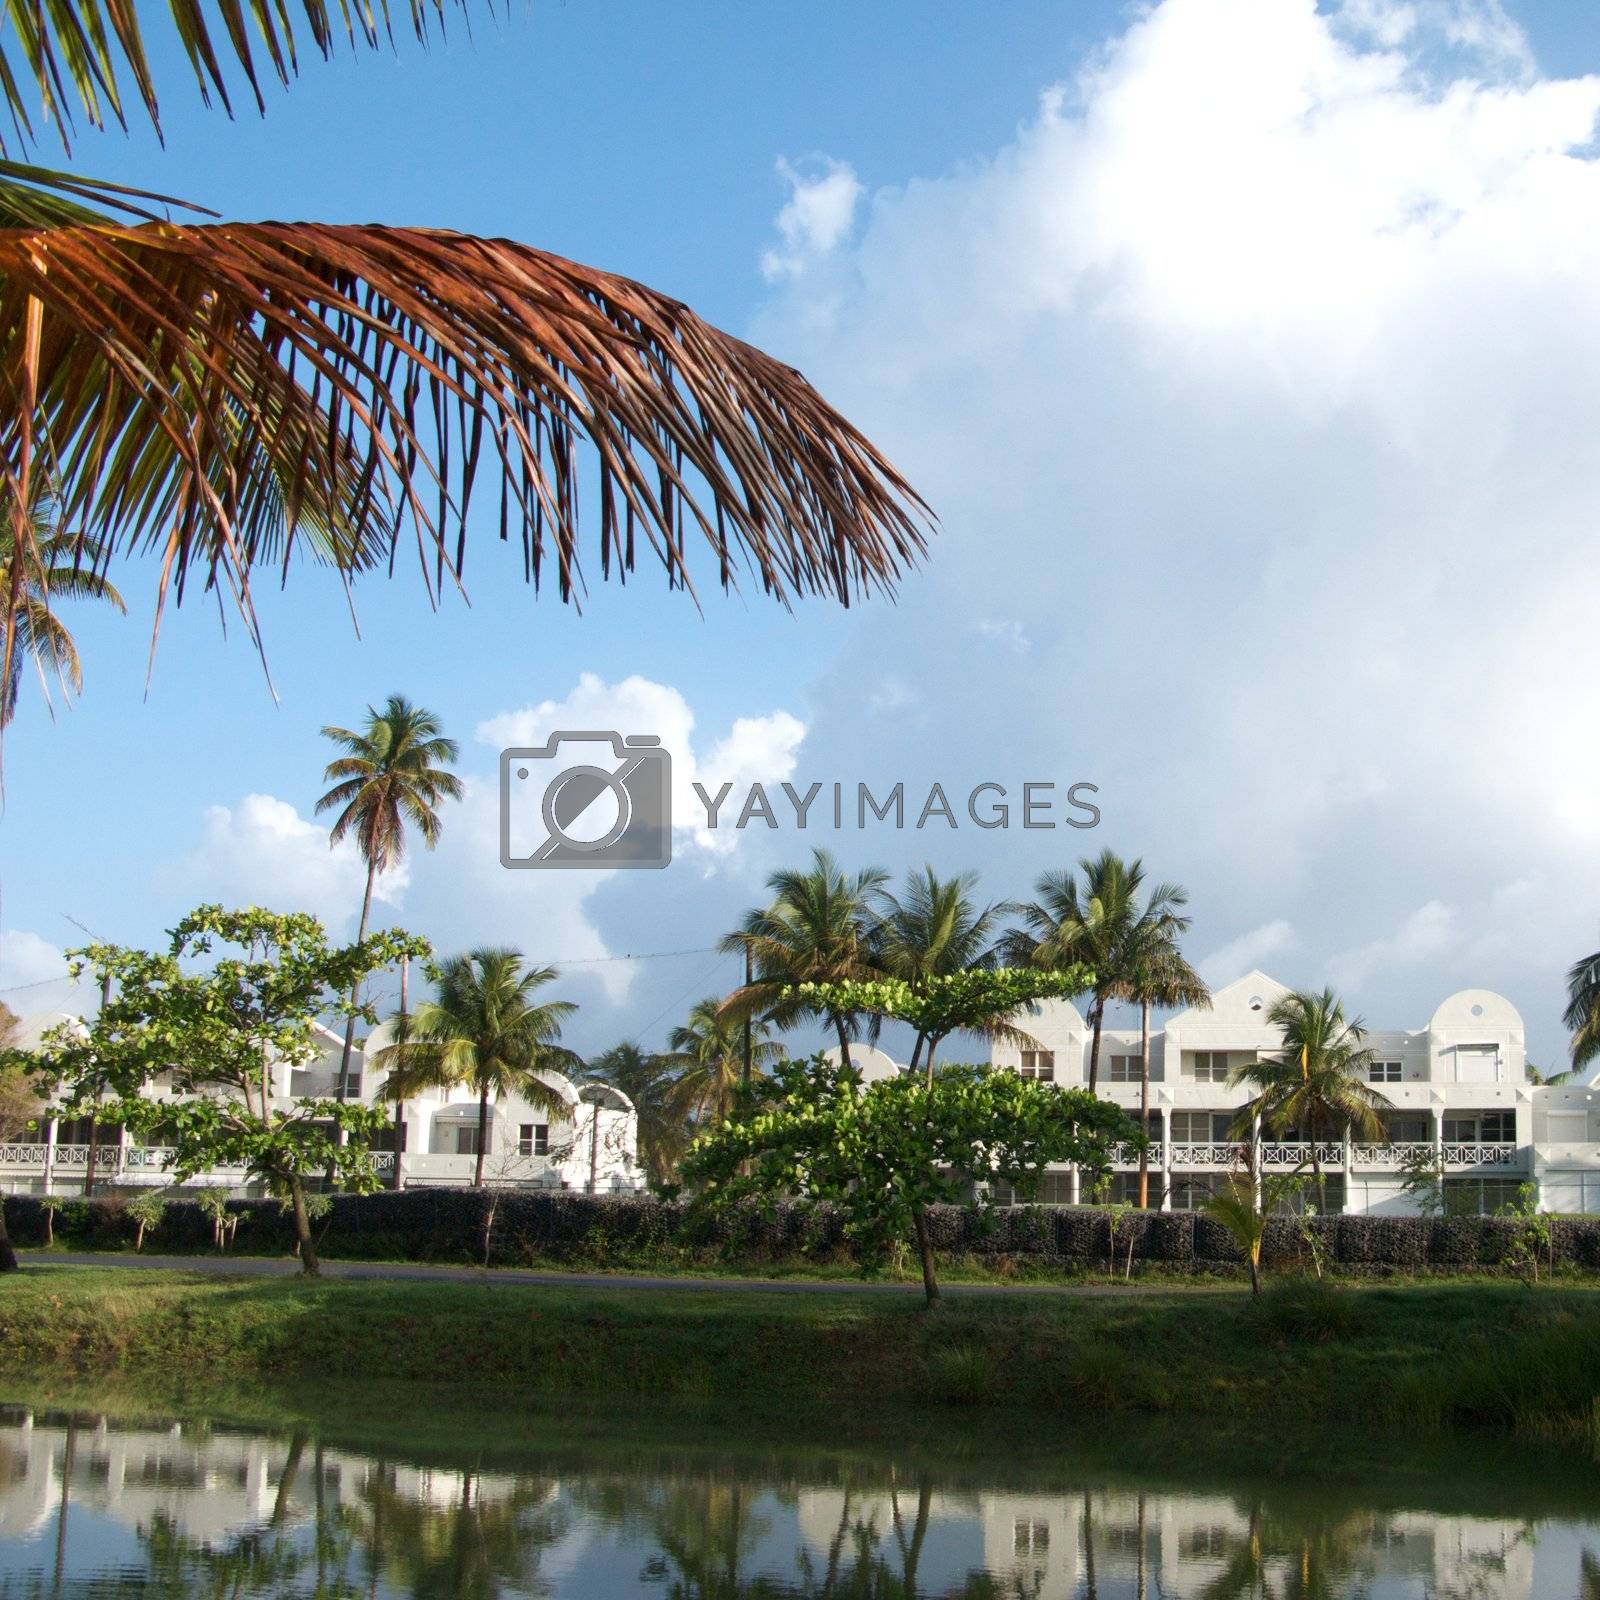 Royalty free image of Puerto Rico Resort by jedphoto